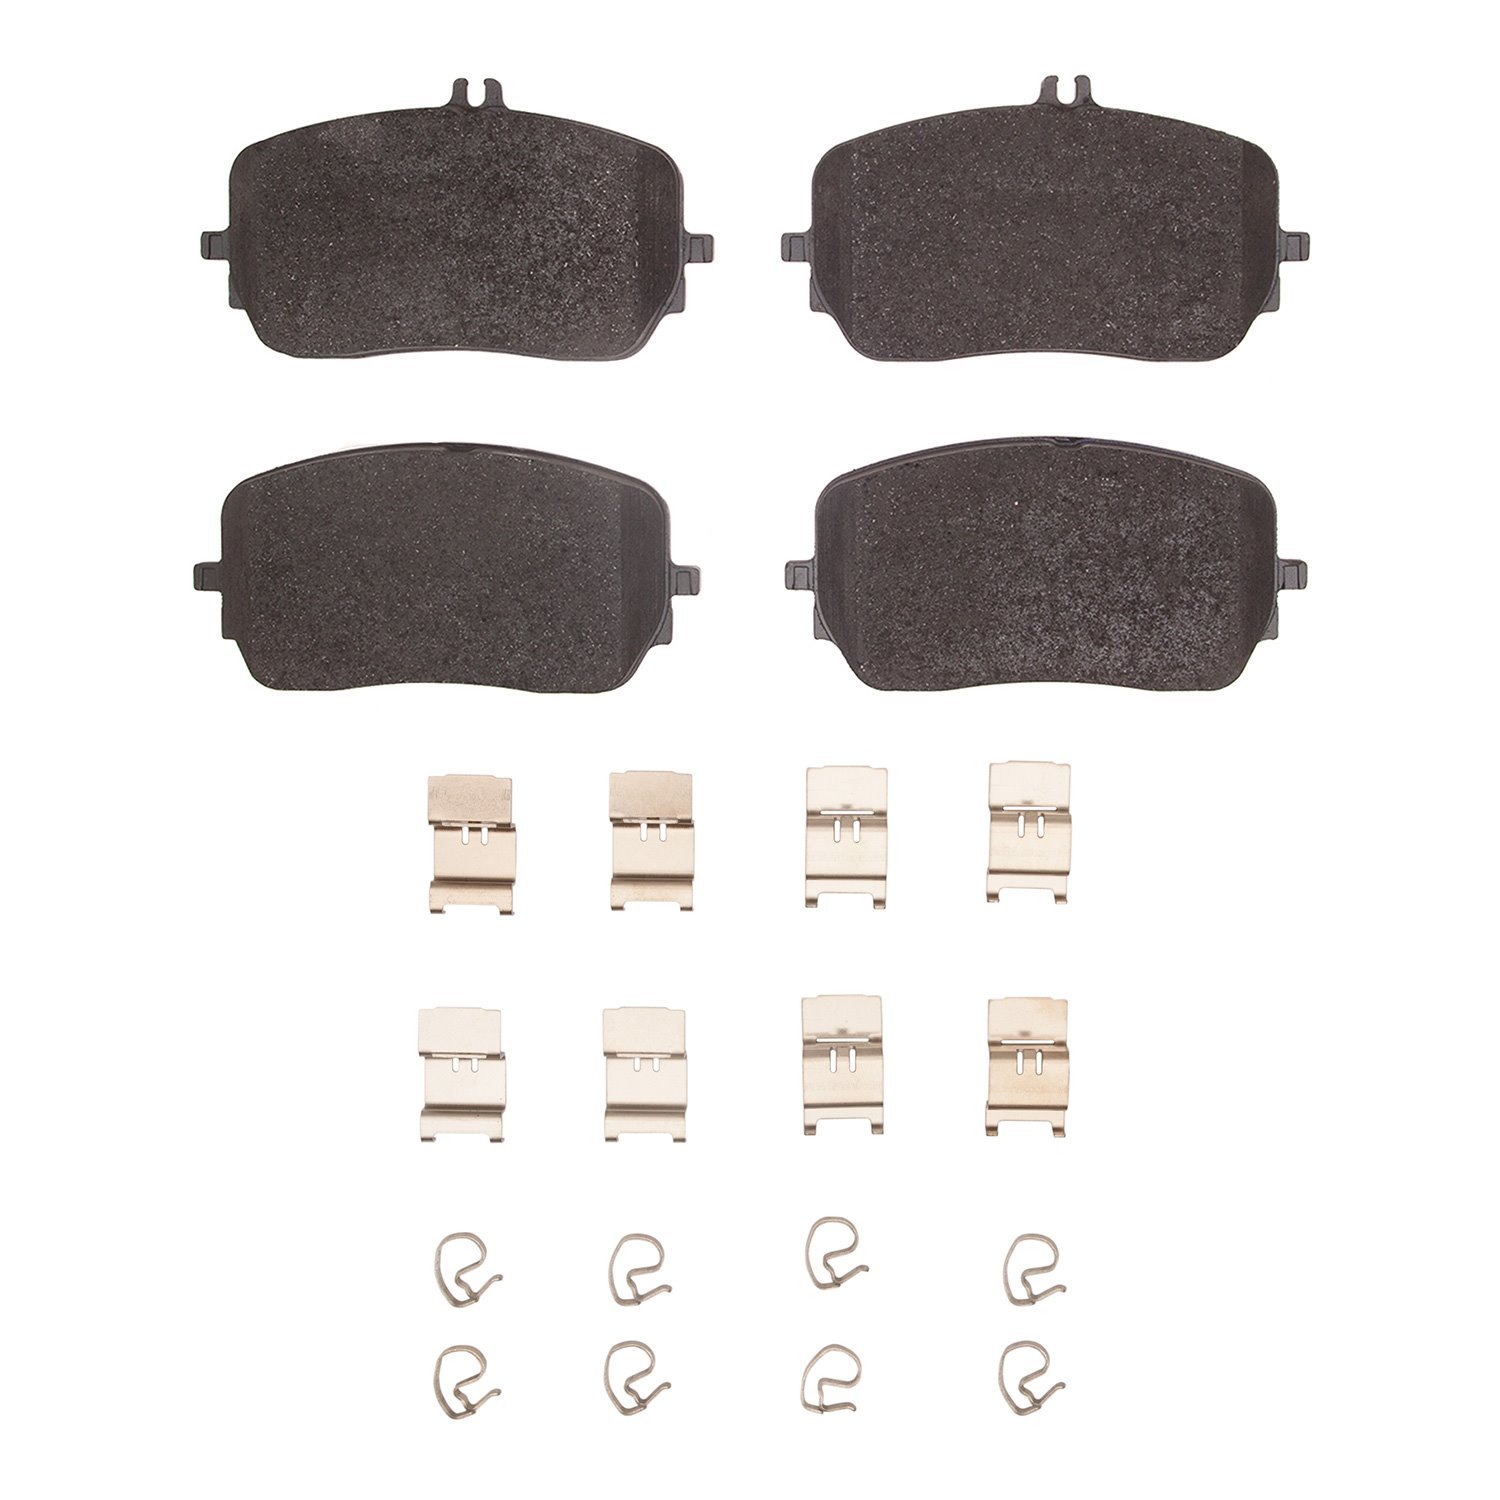 1552-2237-01 5000 Advanced Low-Metallic Brake Pads & Hardware Kit, Fits Select Mercedes-Benz, Position: Front